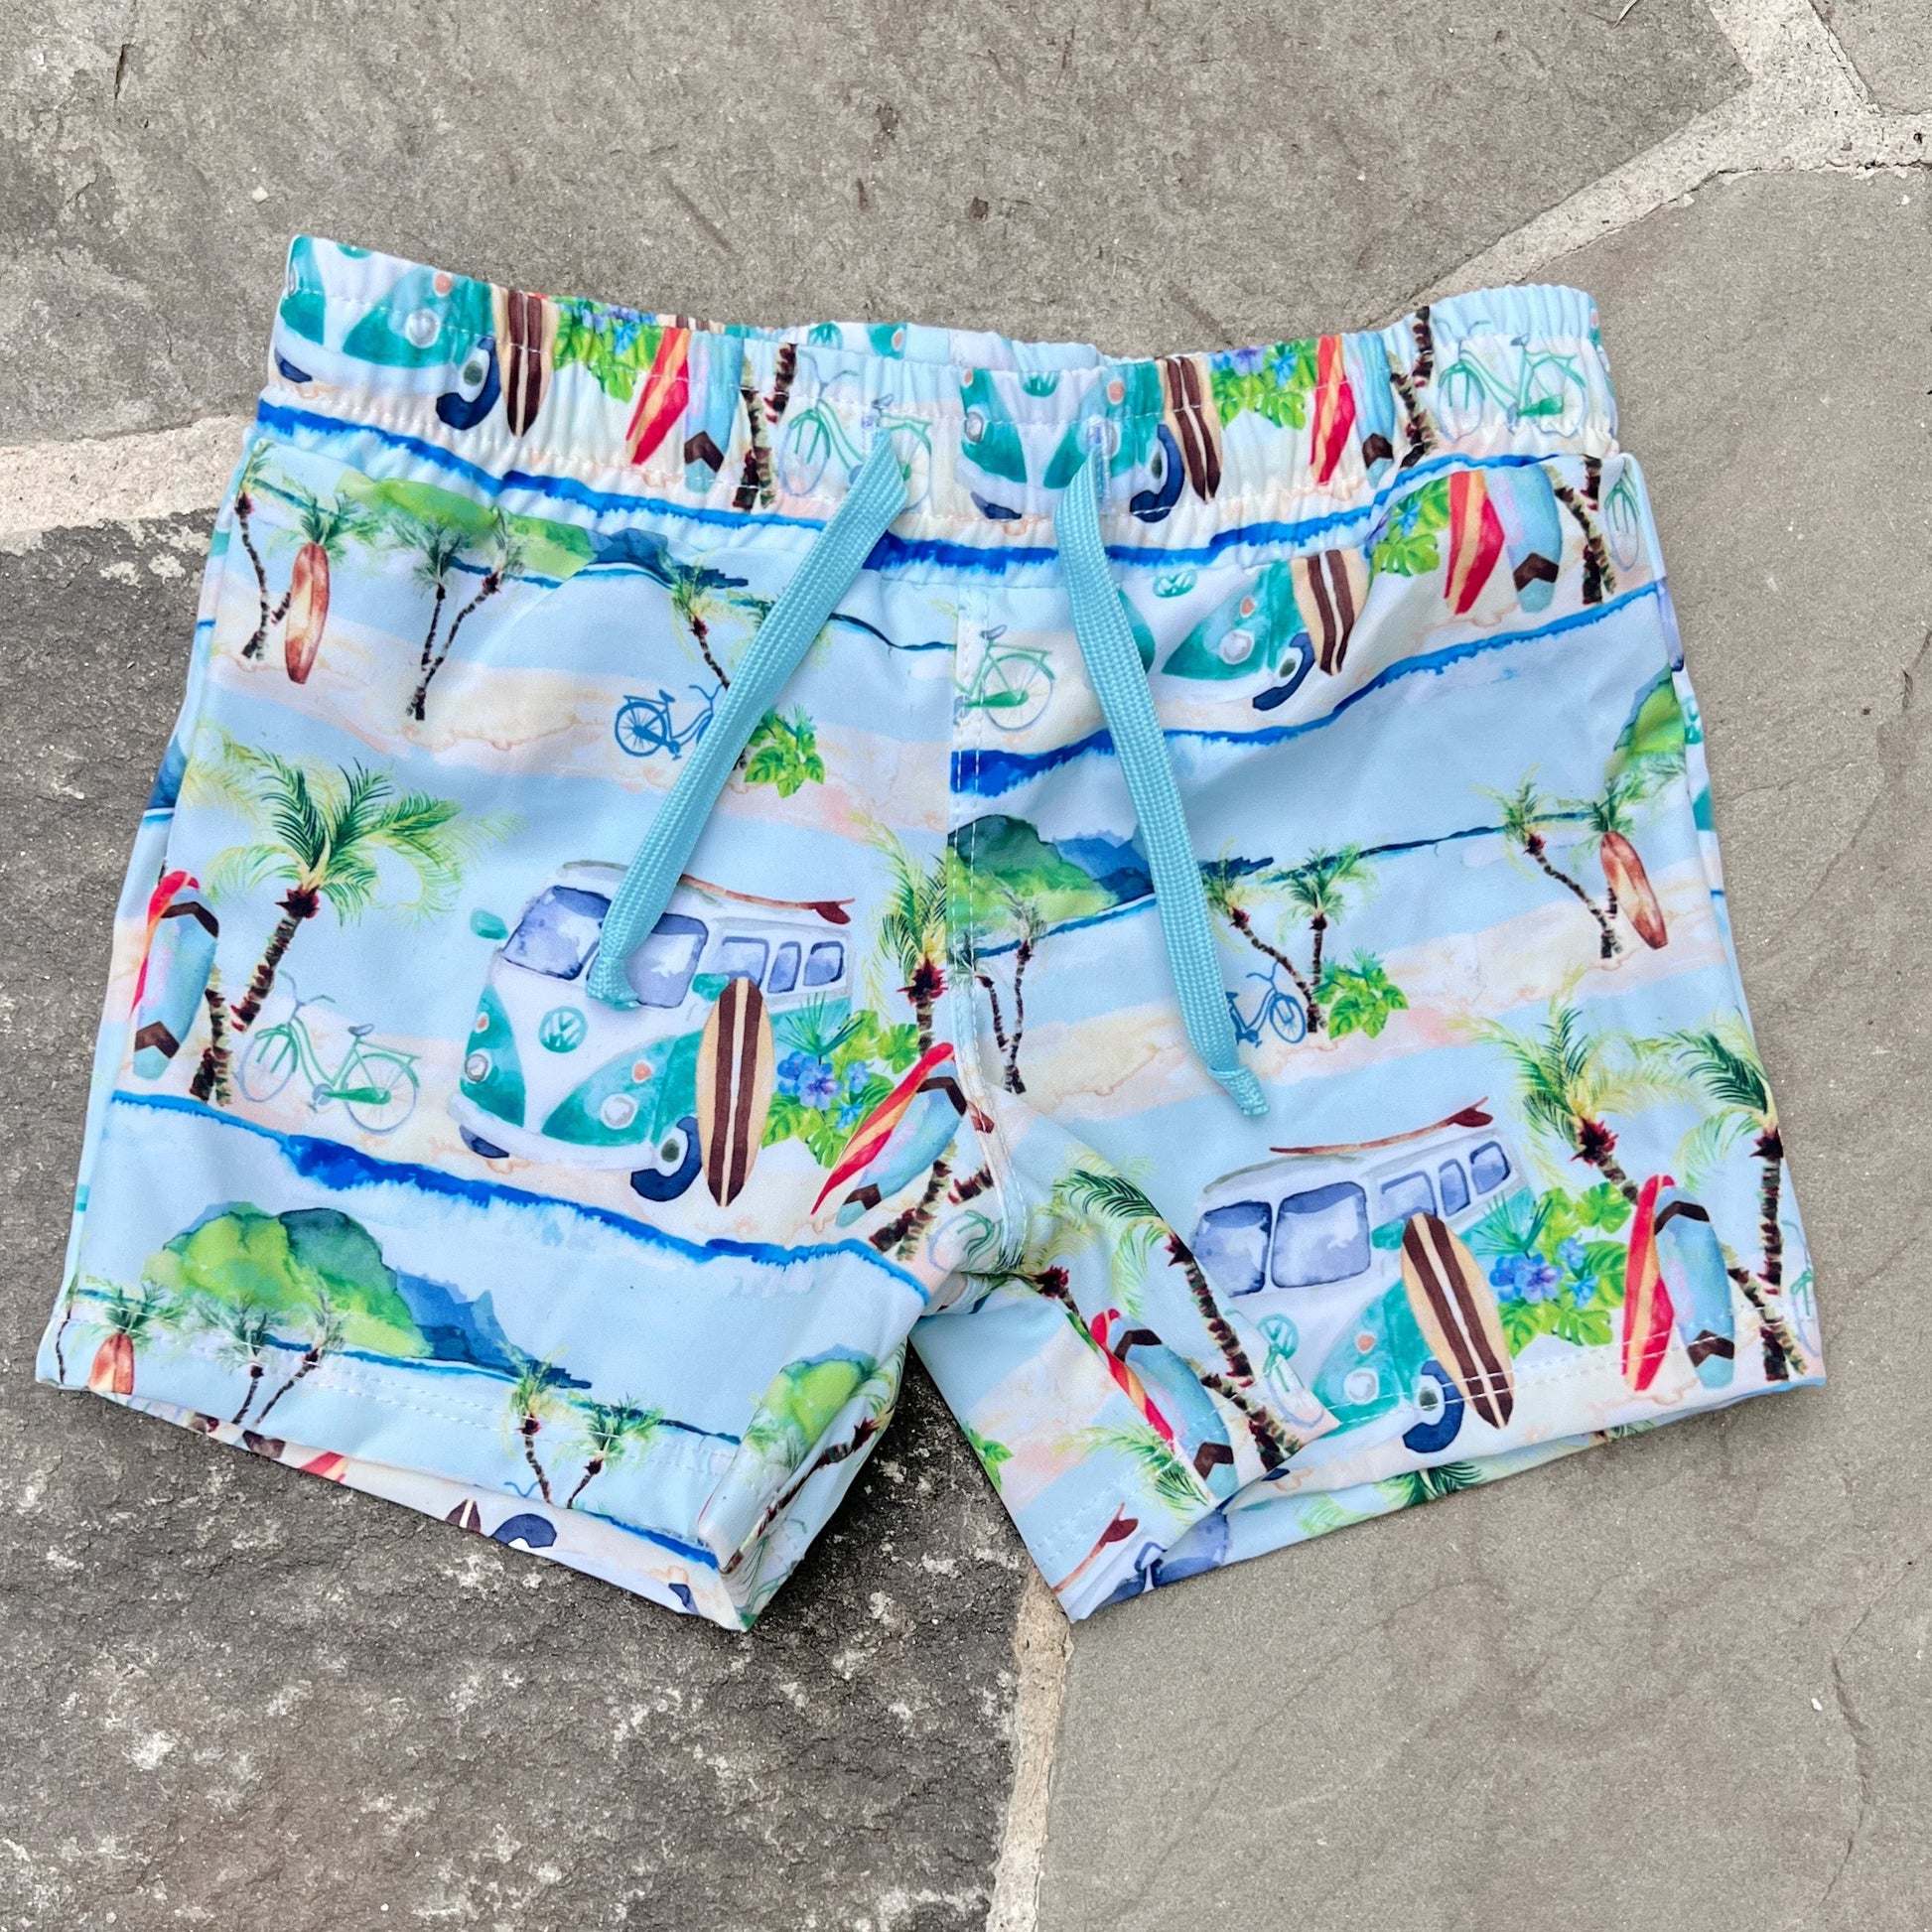 John B Shorts - made from recycled plastic right here in the USA